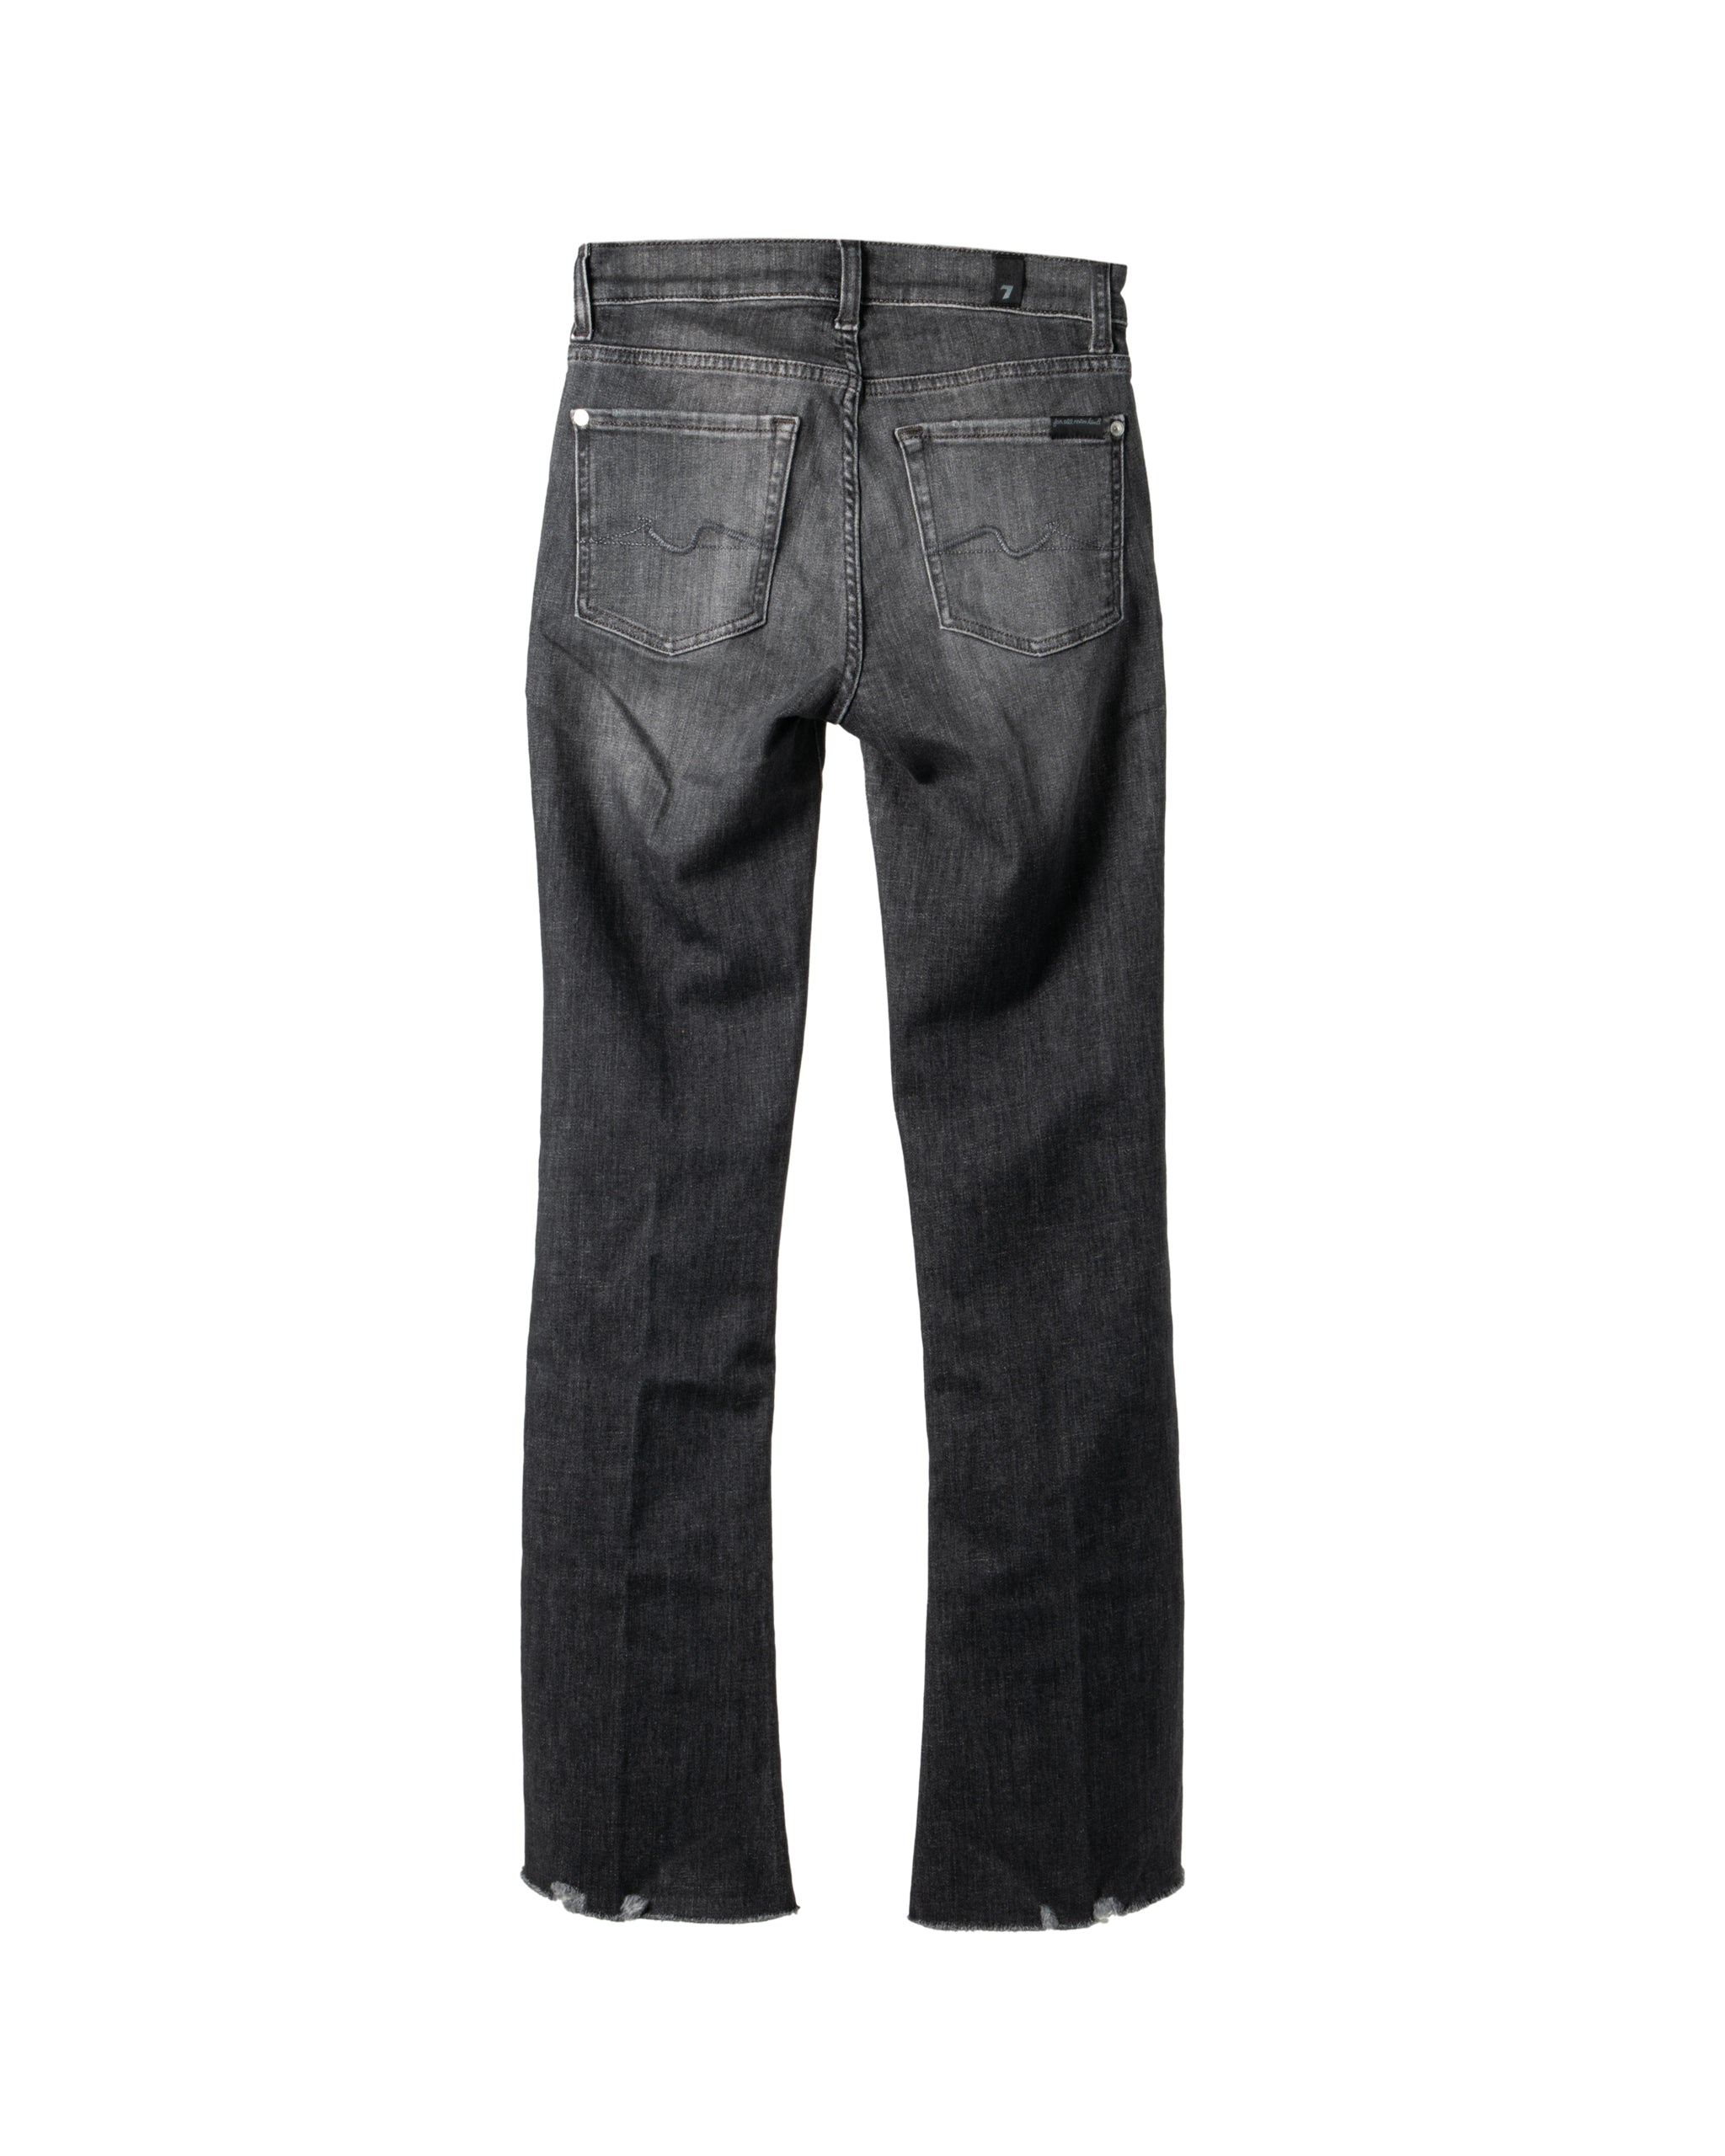 BOOTCUT TAILORLESS 32INCH